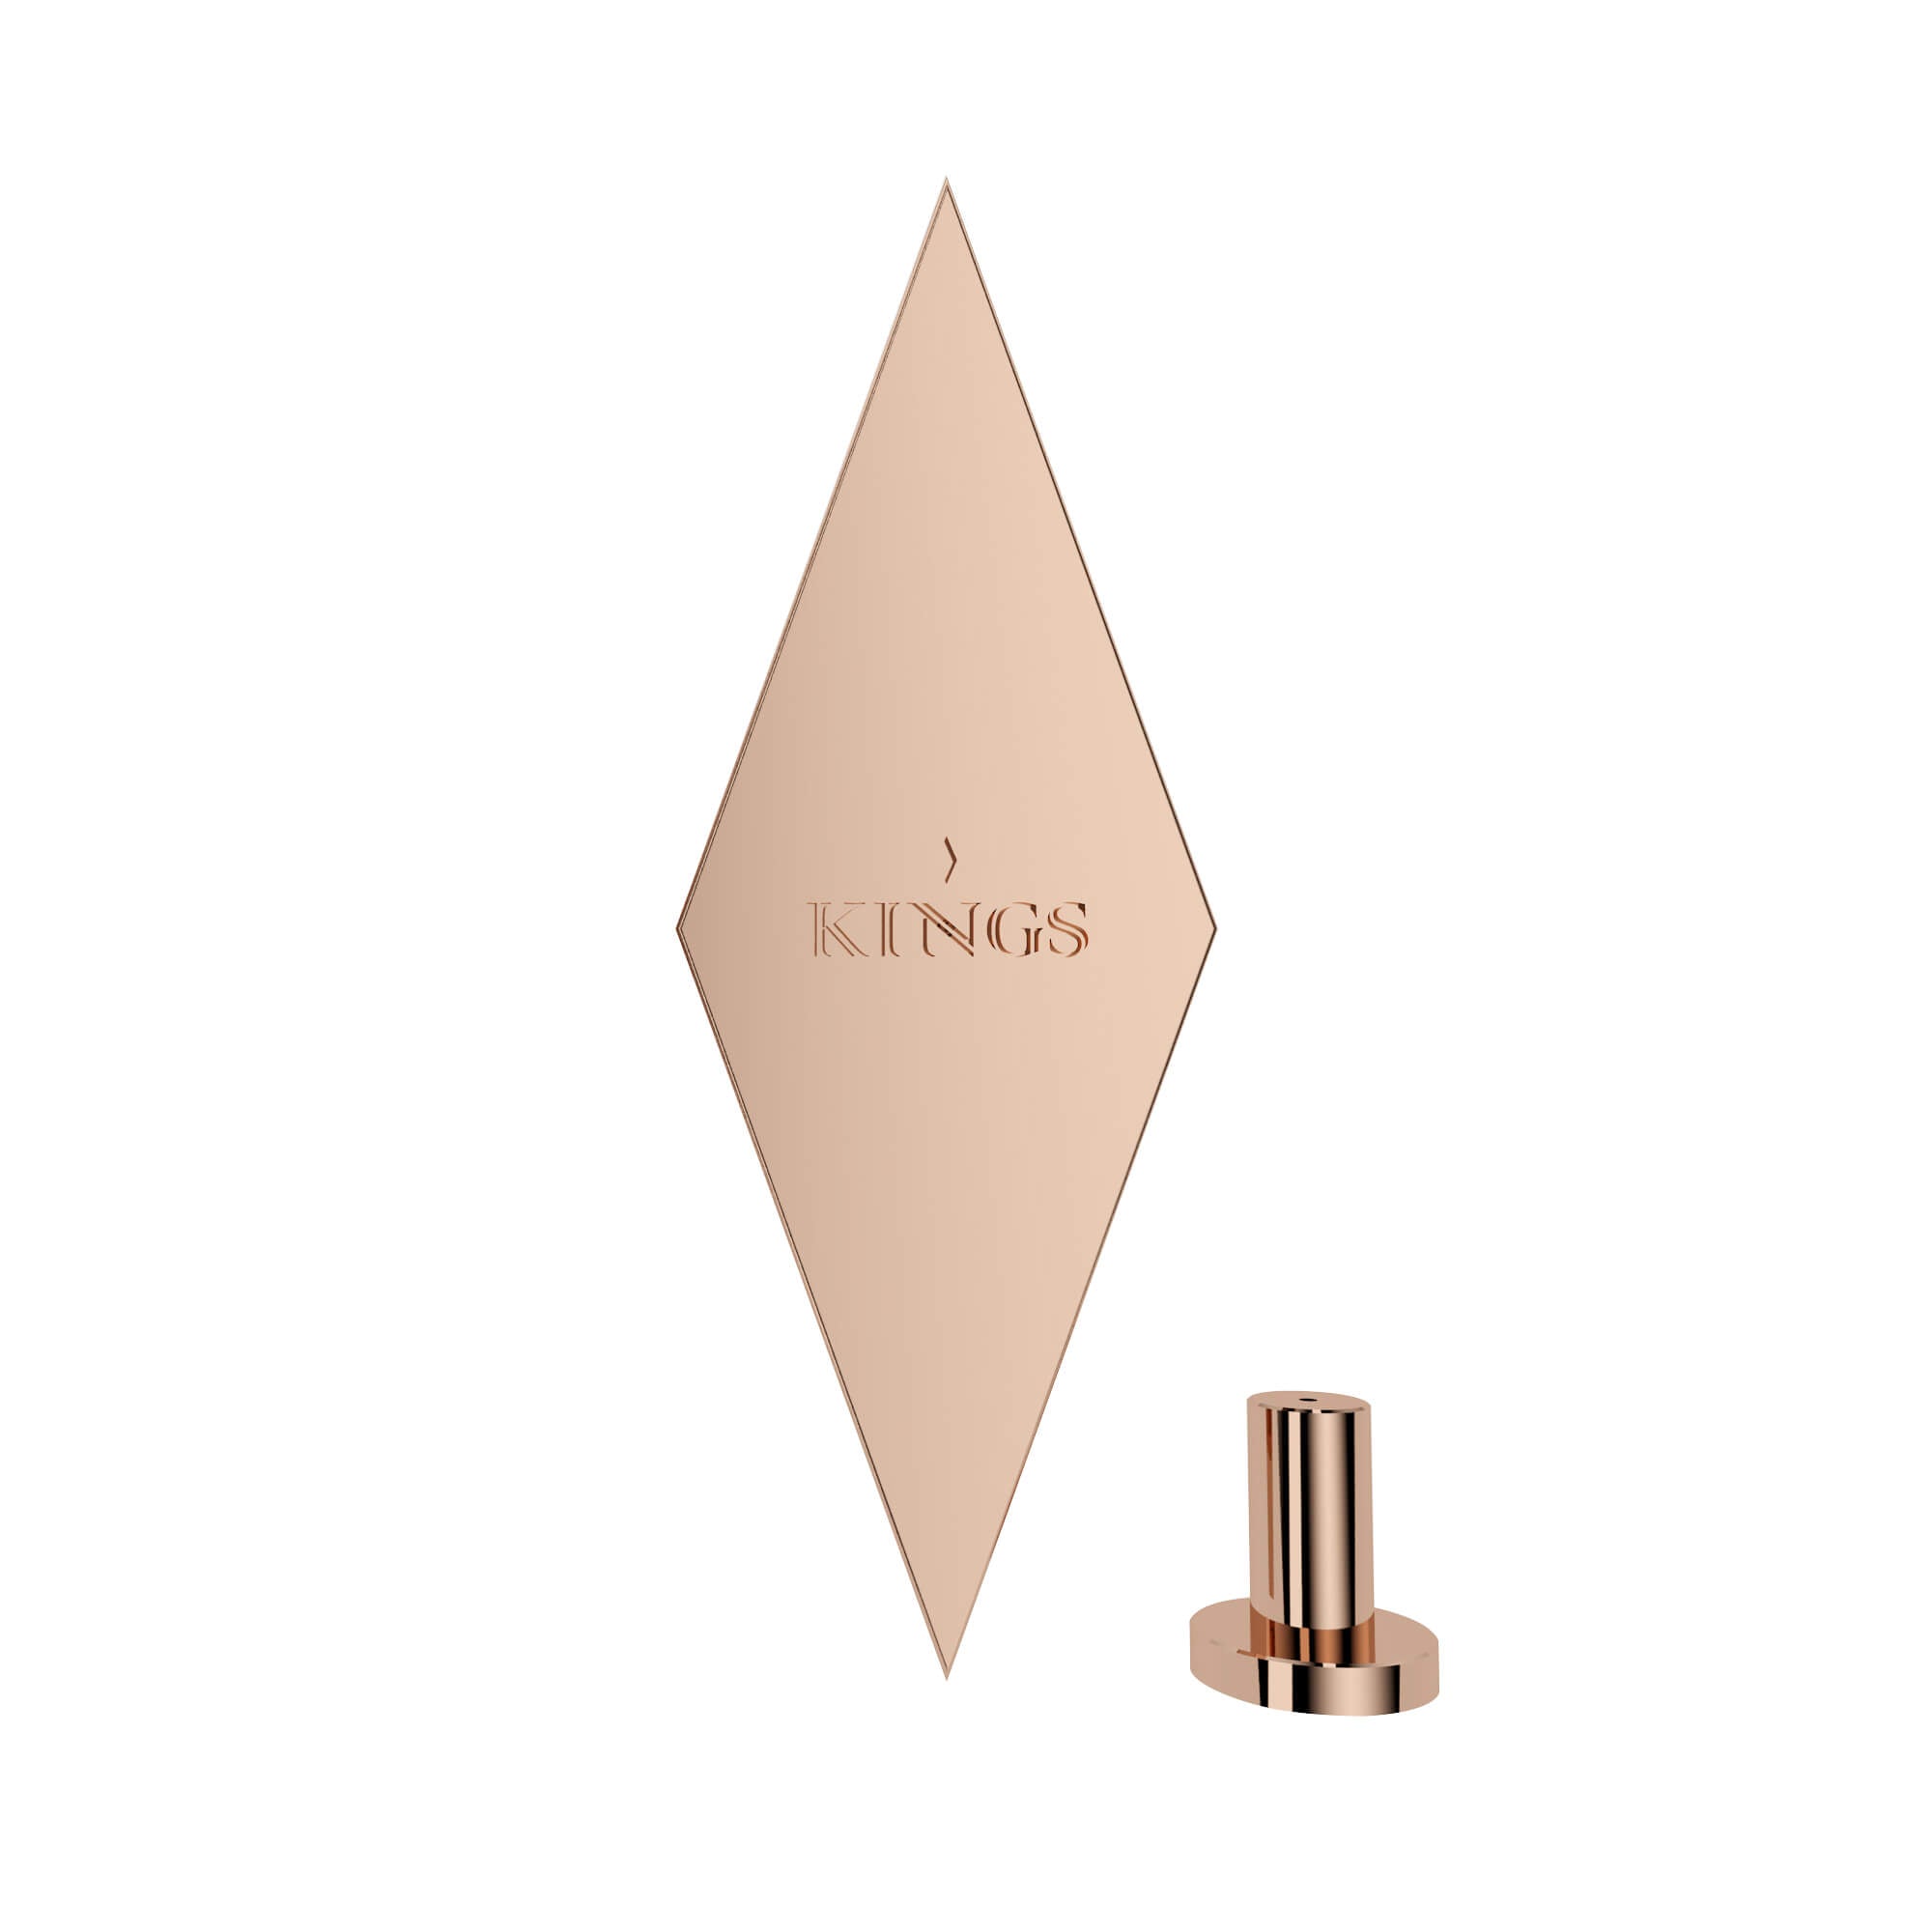 Gold Broaches for Men in rose, yellow and white gold by Kings